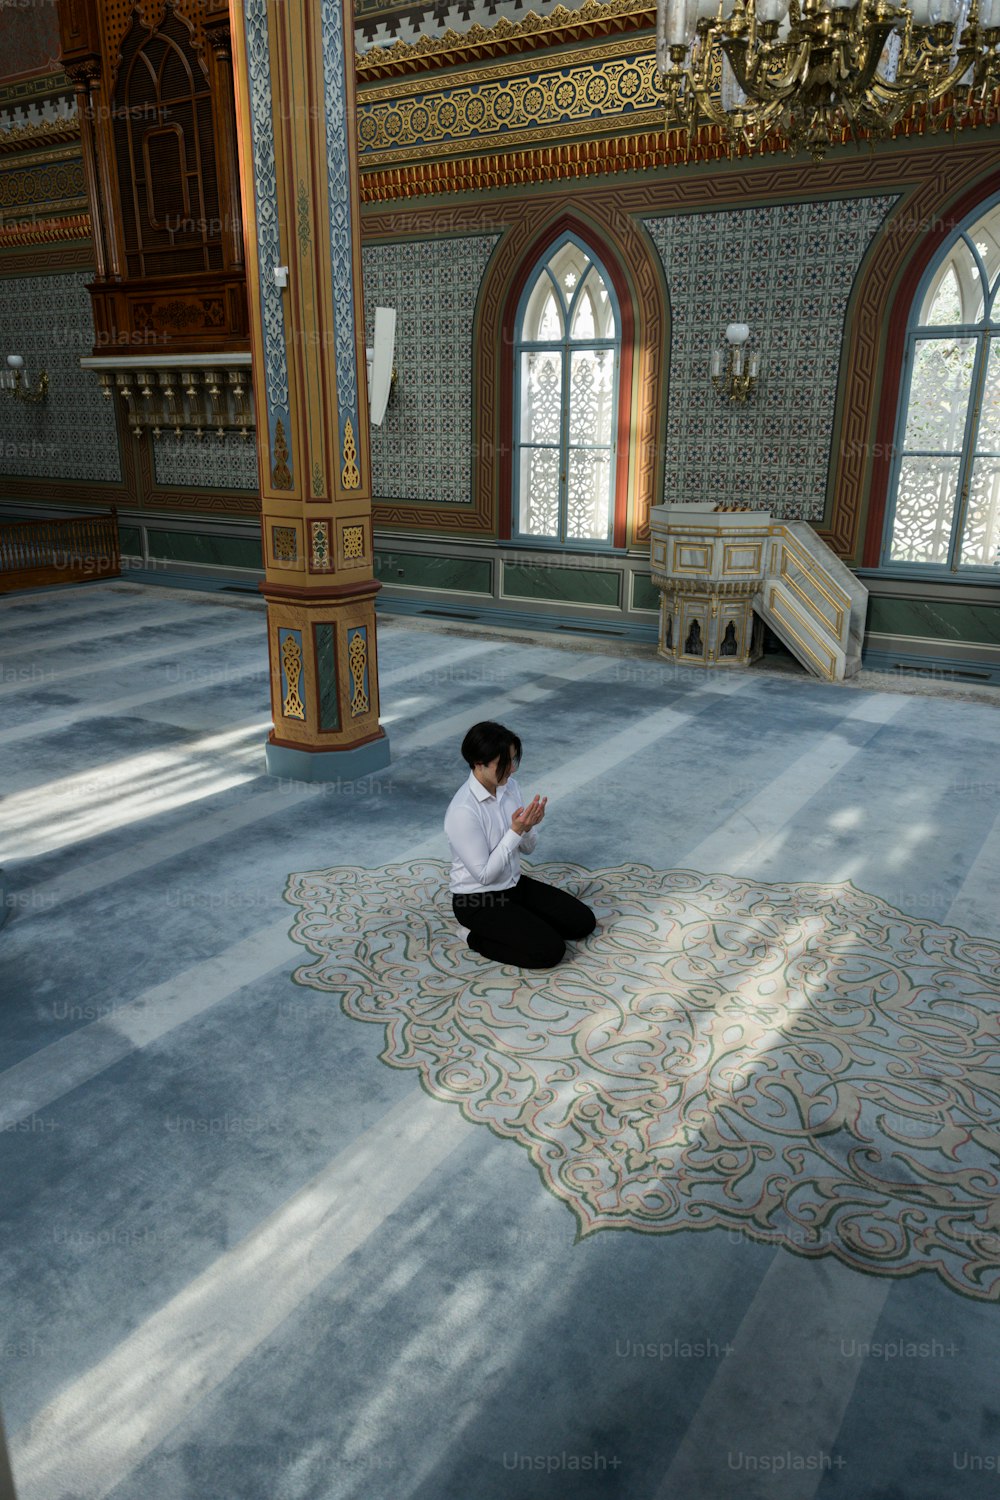 a person sitting on a rug in a room